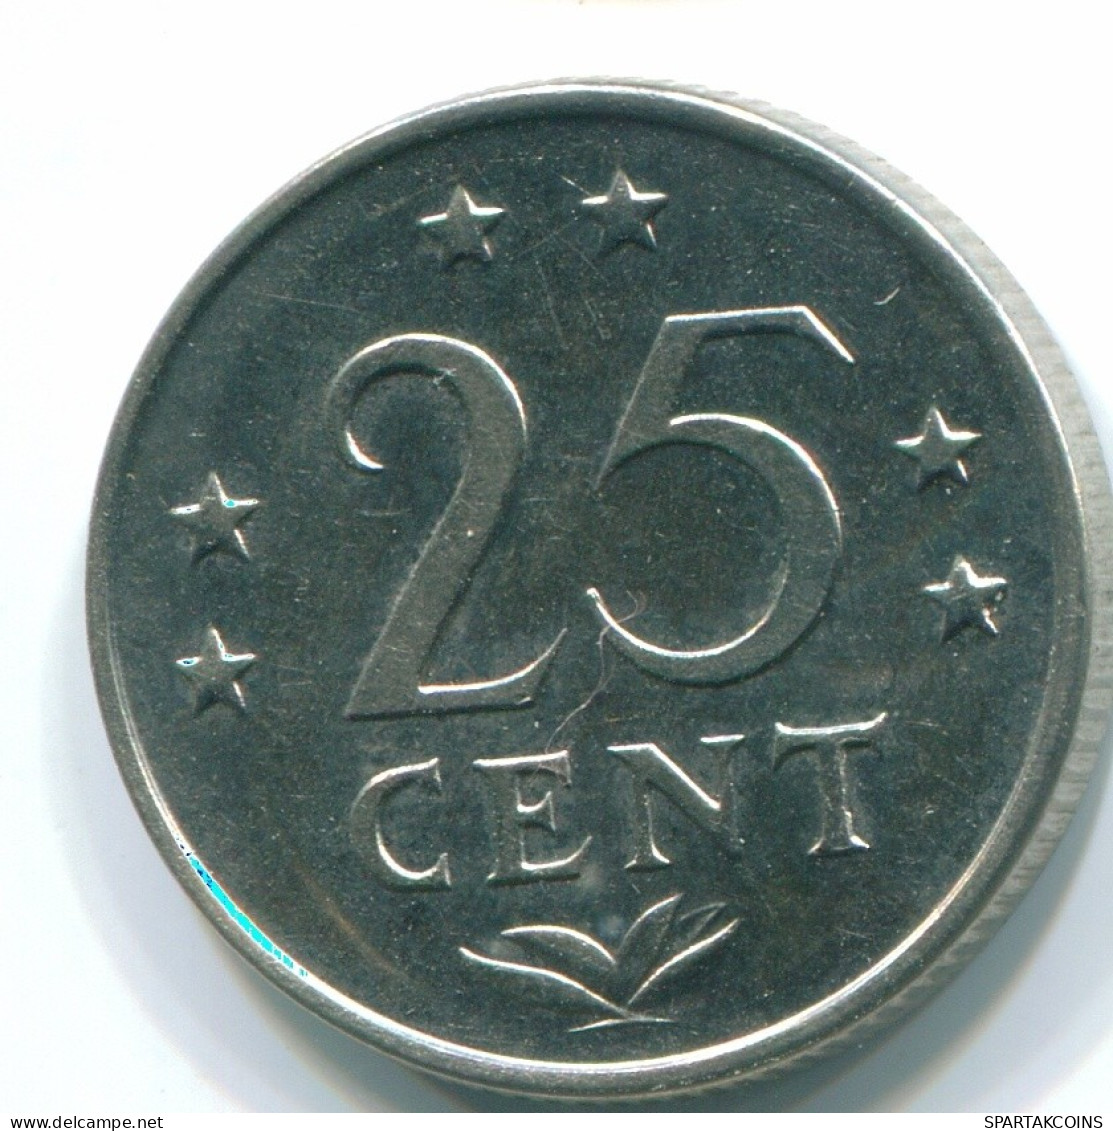 25 CENTS 1971 NETHERLANDS ANTILLES Nickel Colonial Coin #S11576.U.A - Netherlands Antilles